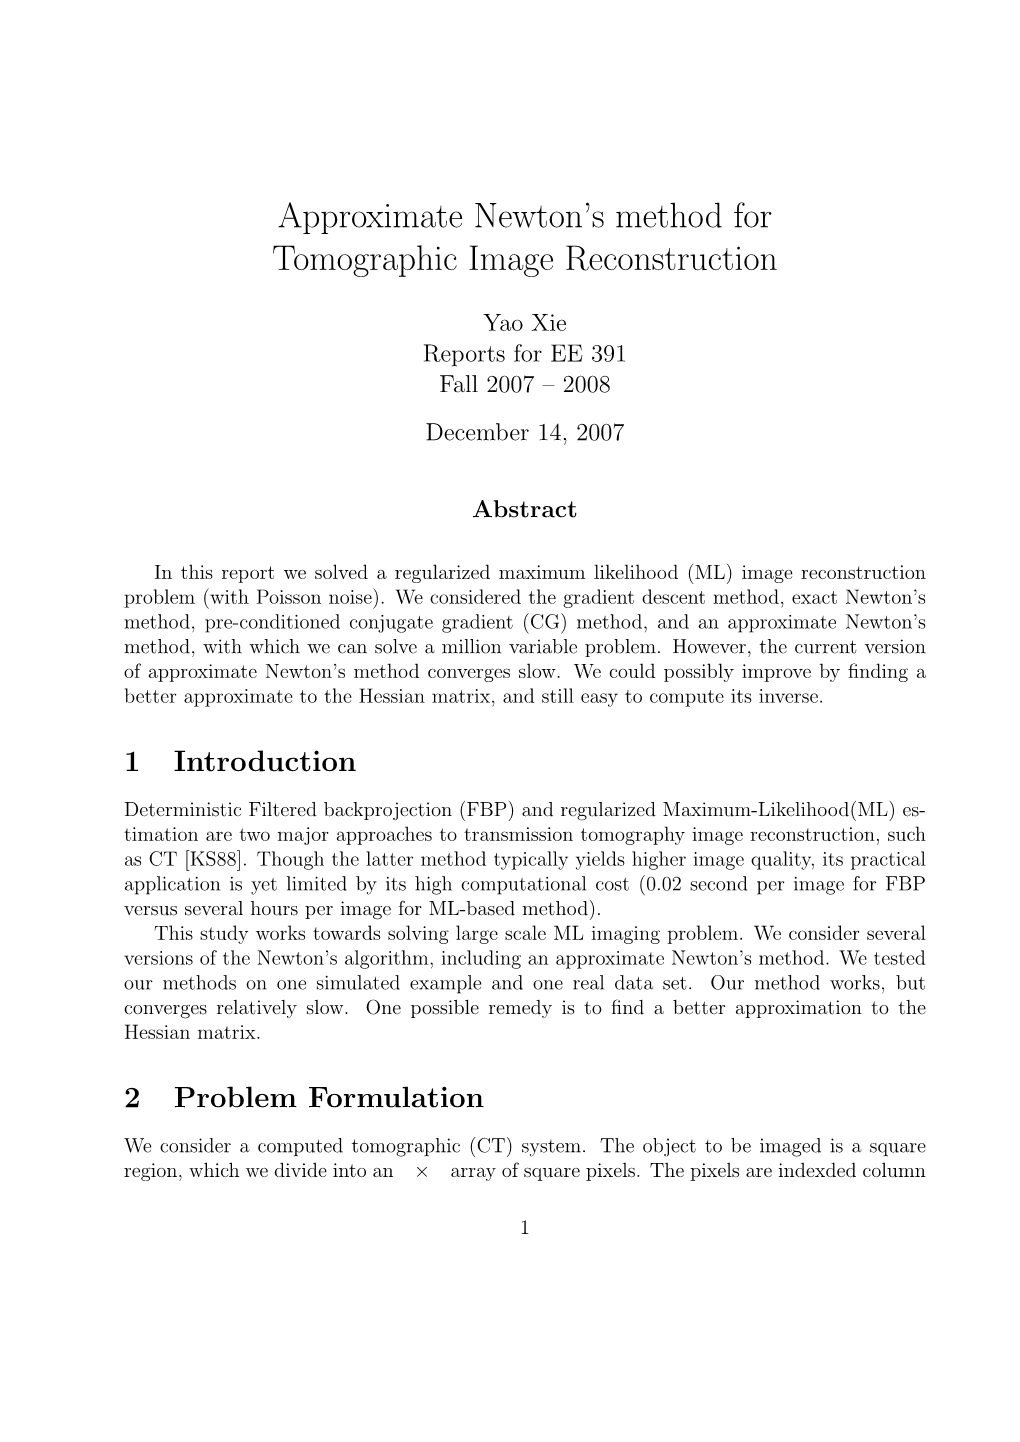 Approximate Newton's Method for Tomographic Image Reconstruction